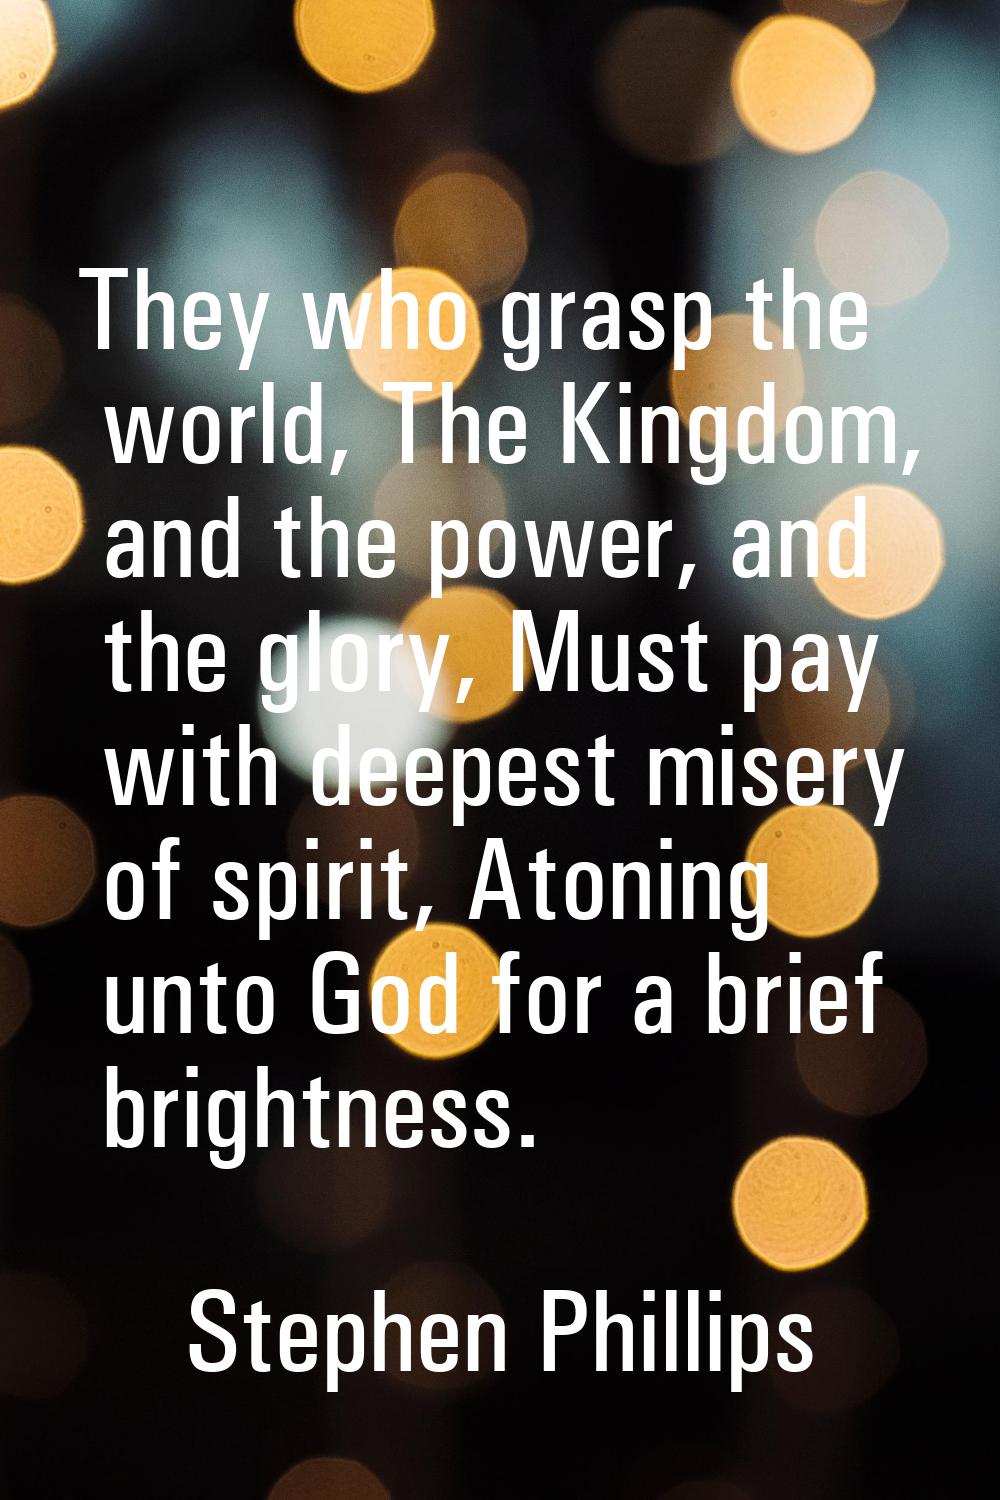 They who grasp the world, The Kingdom, and the power, and the glory, Must pay with deepest misery o